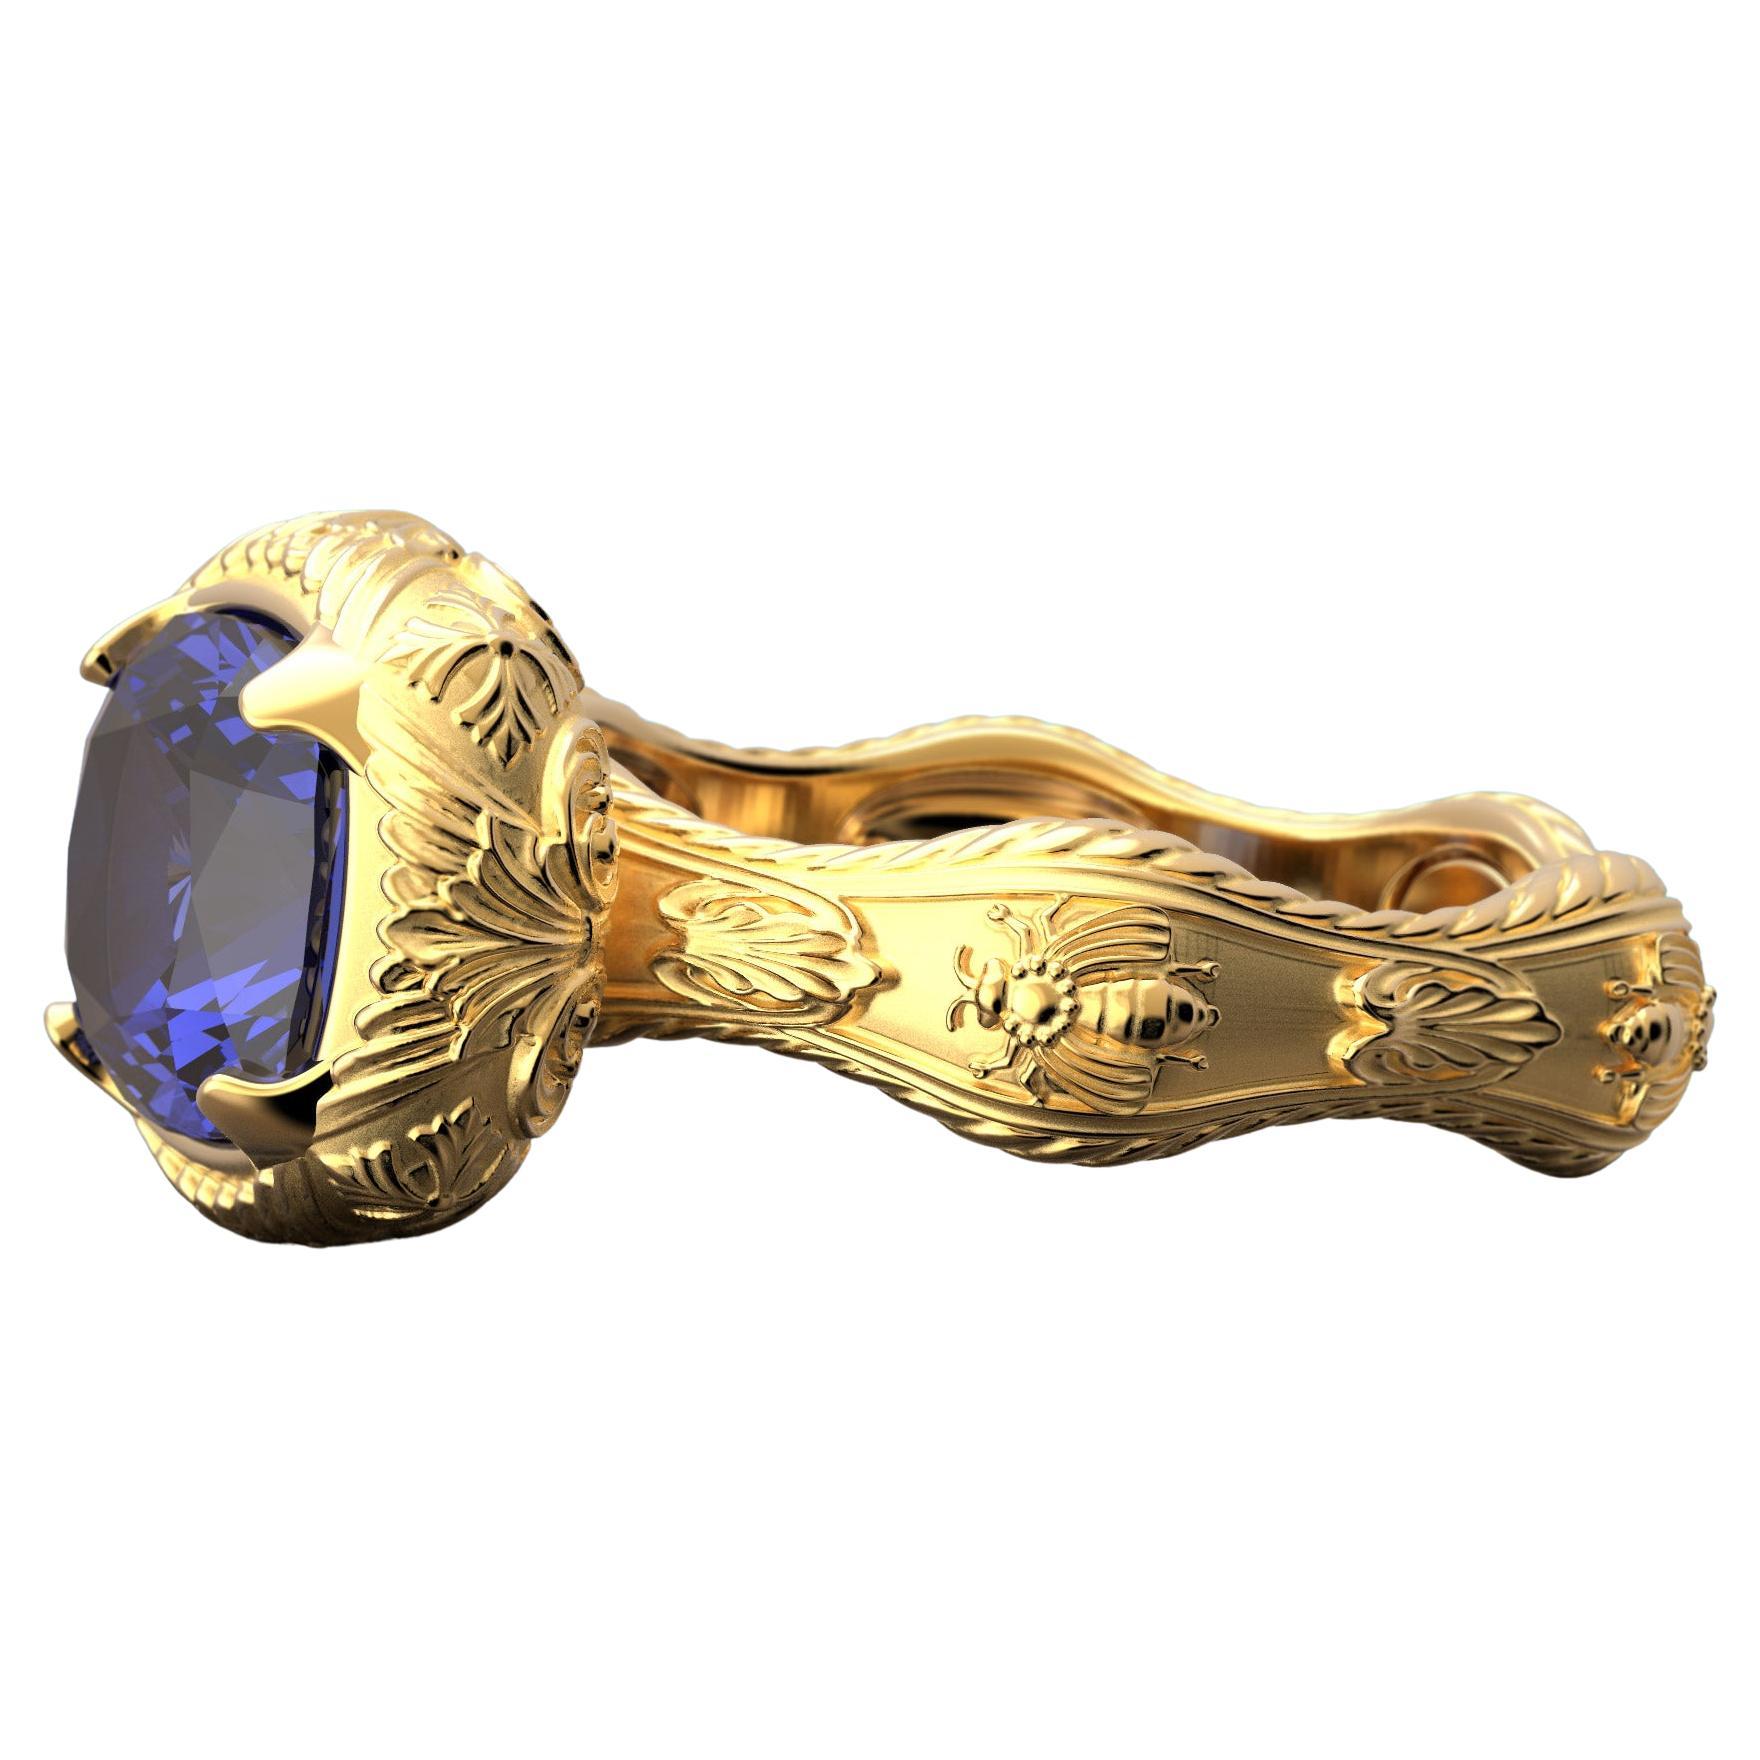 For Sale:  Tanzanite Ring Made In Italy by Oltremare Gioielli in 18k genuine gold